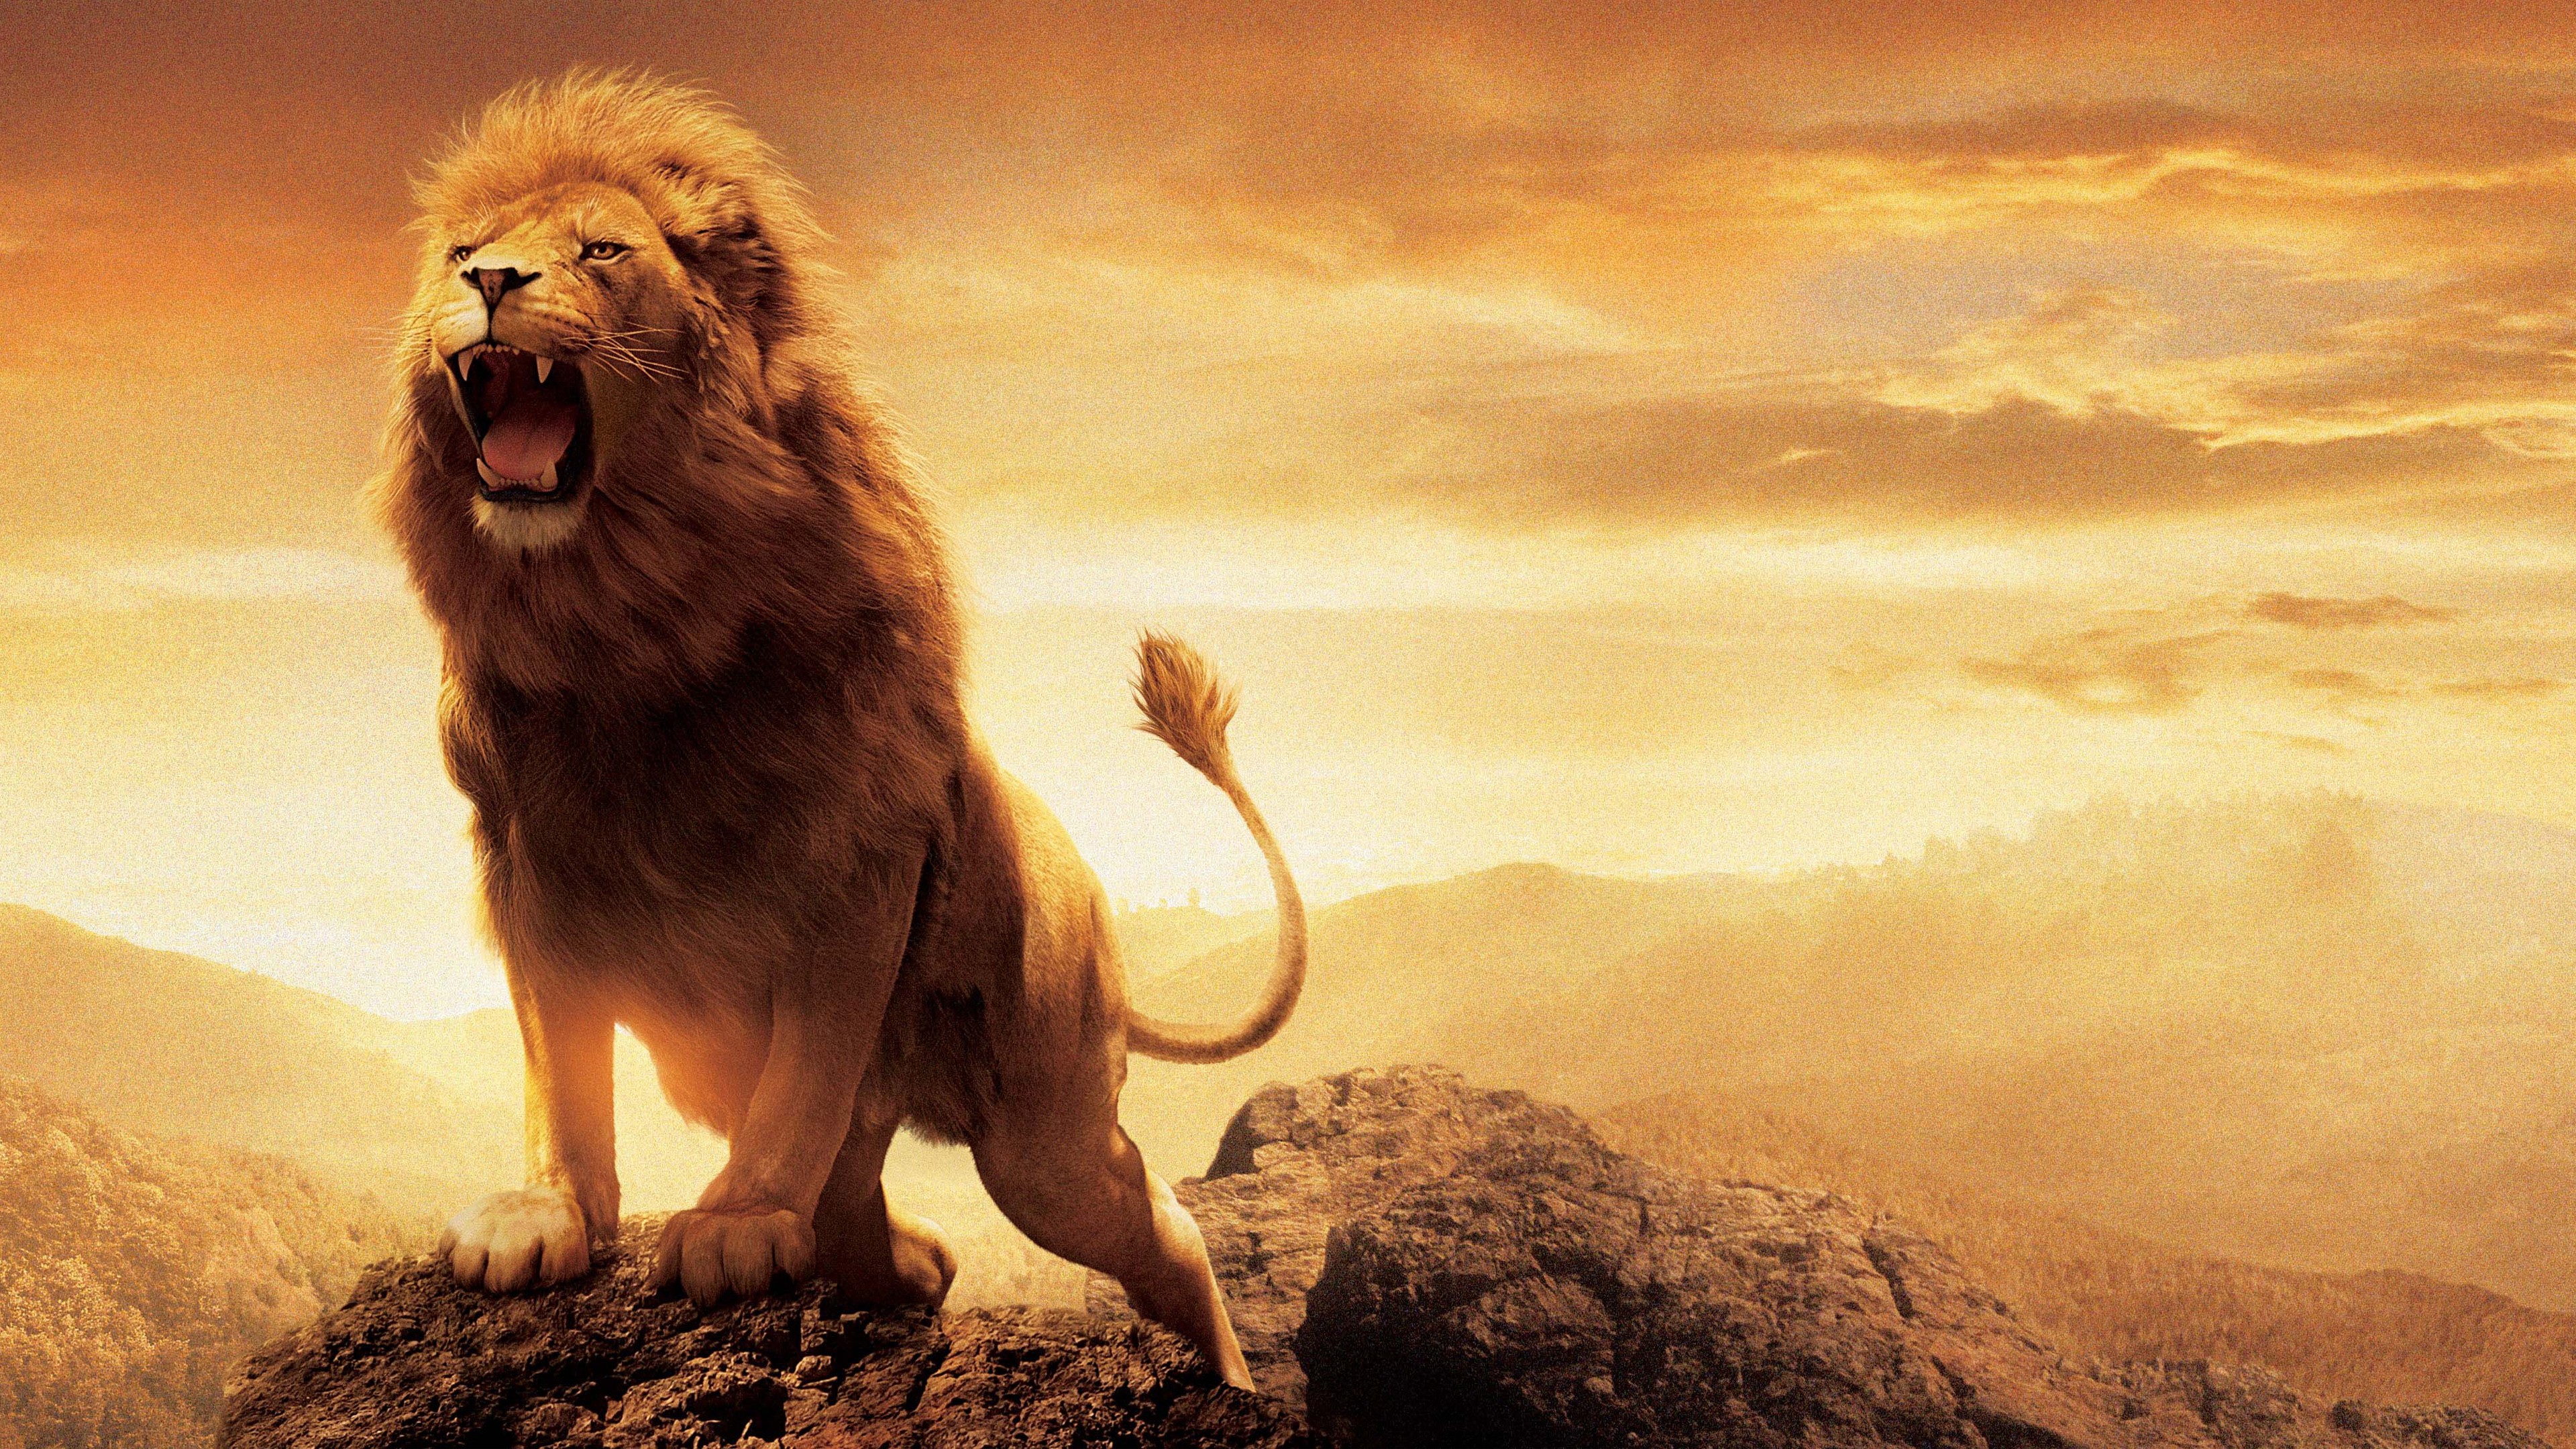 General 3840x2160 nature The Chronicles of Narnia lion